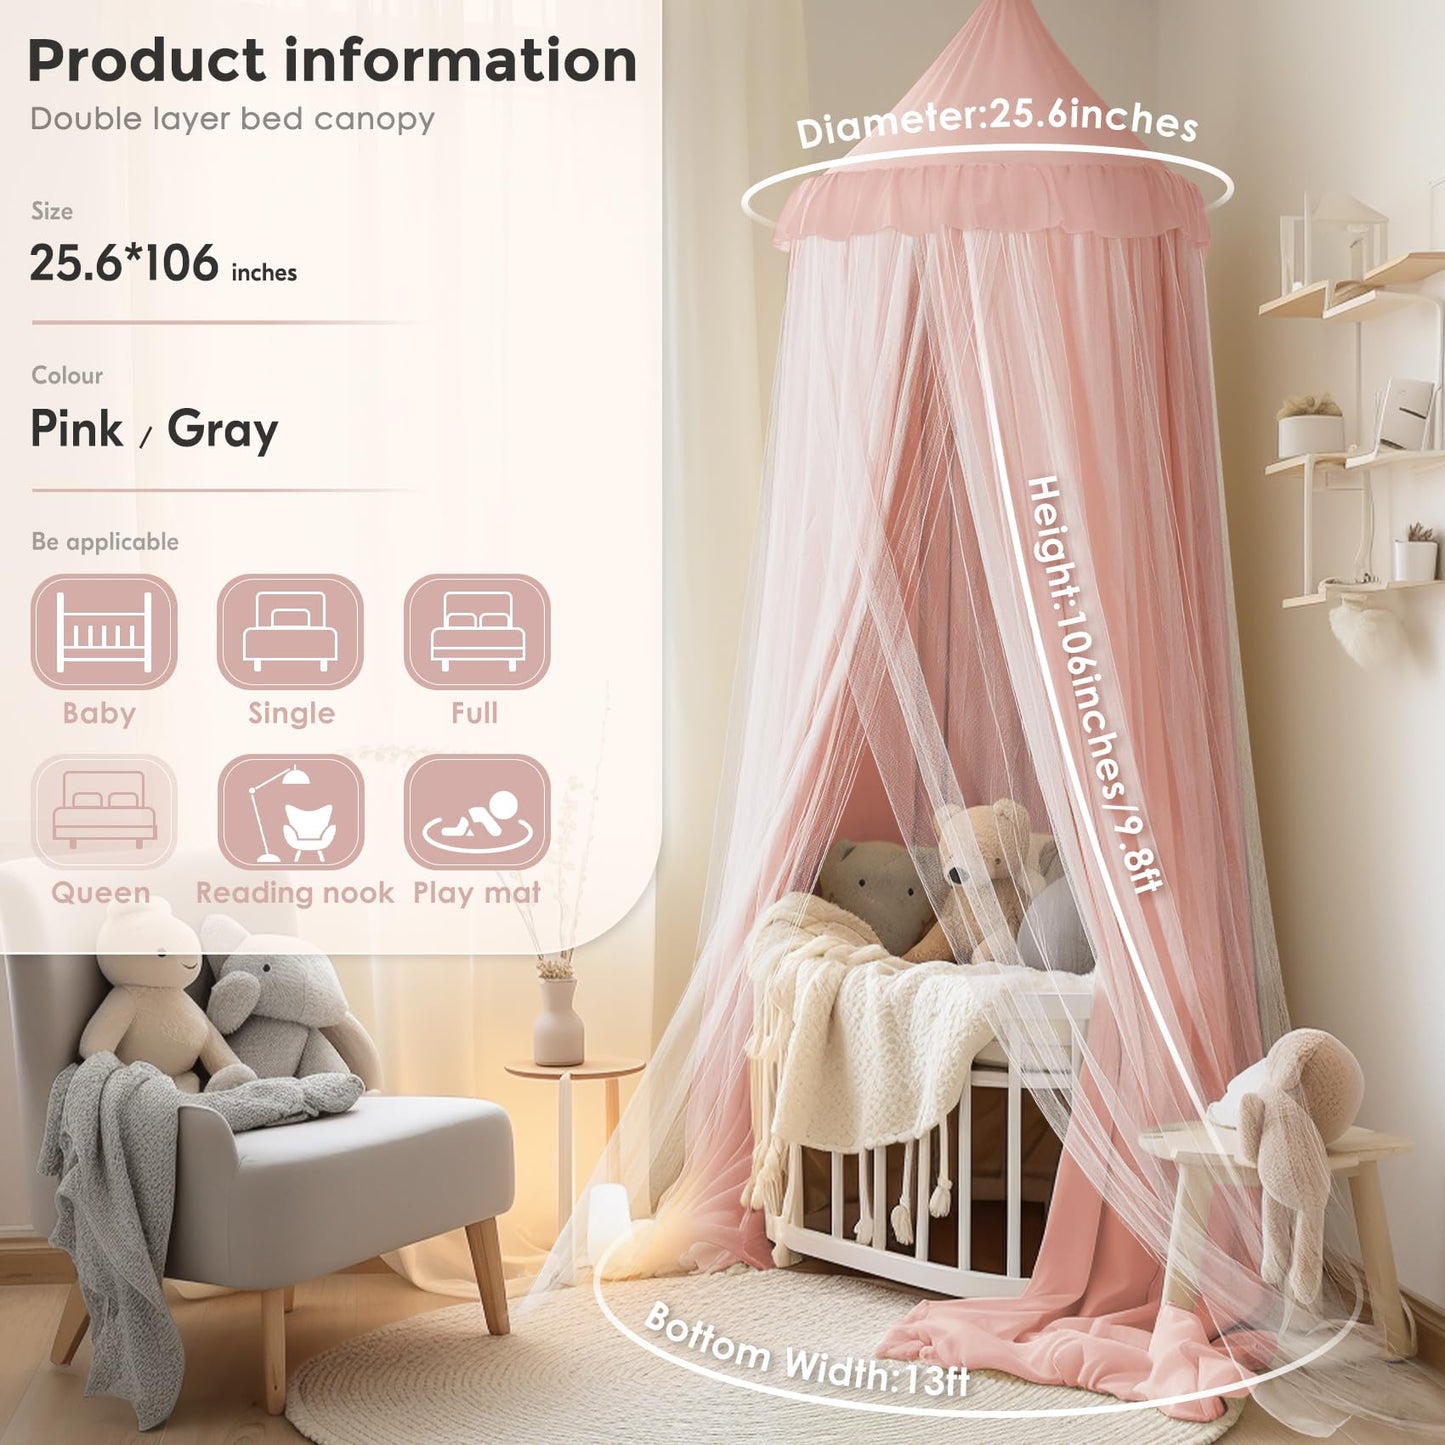 little dove Bed Canopy with Star Lights, Double Layer Canopy for Bed, Princess Play Tent for Girls Room, Breathable Canopy Bed Curtain for Children Reading Nook, Machine Washable Canopy, 25.6''x106''